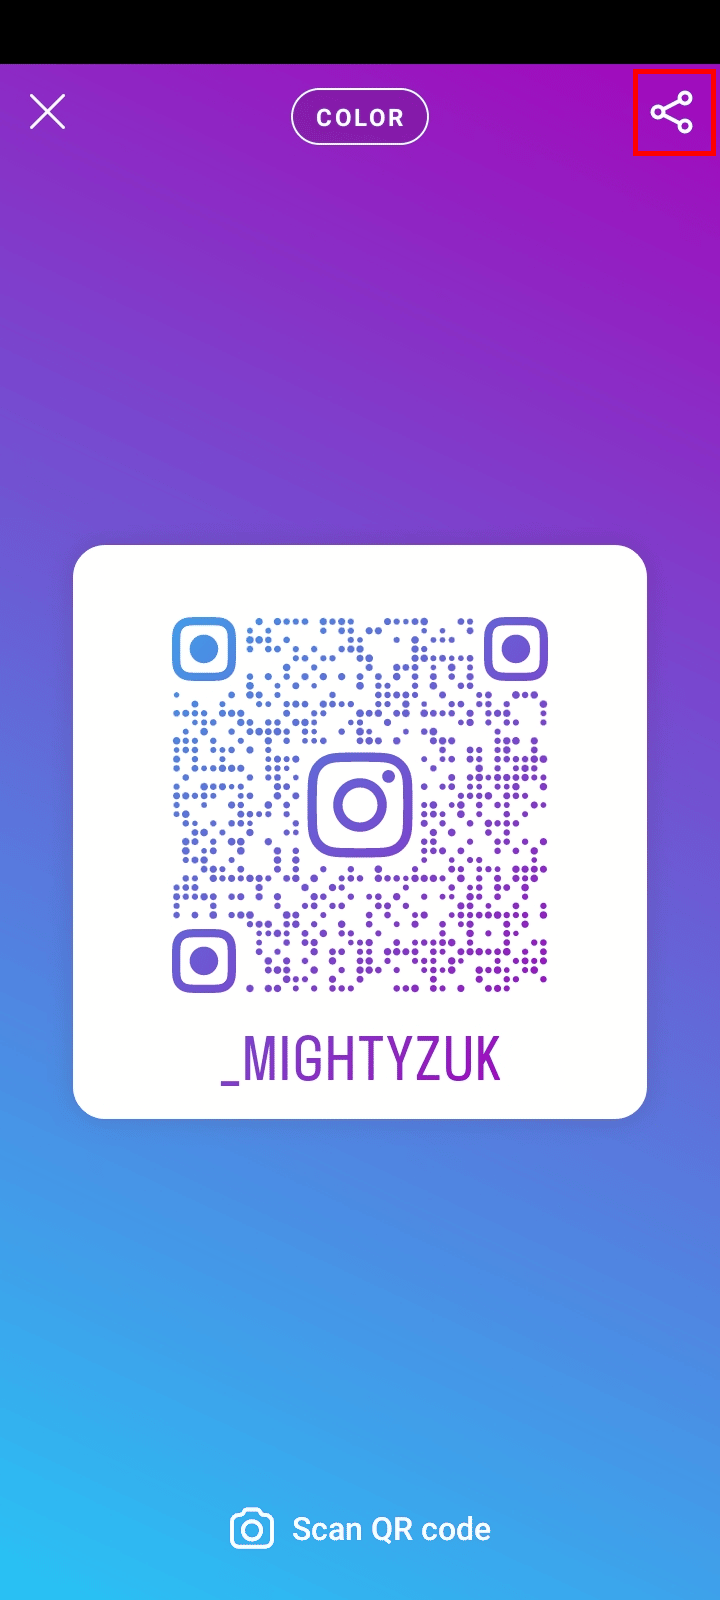 Tap on the Share icon at the top right corner of the QR code screen.